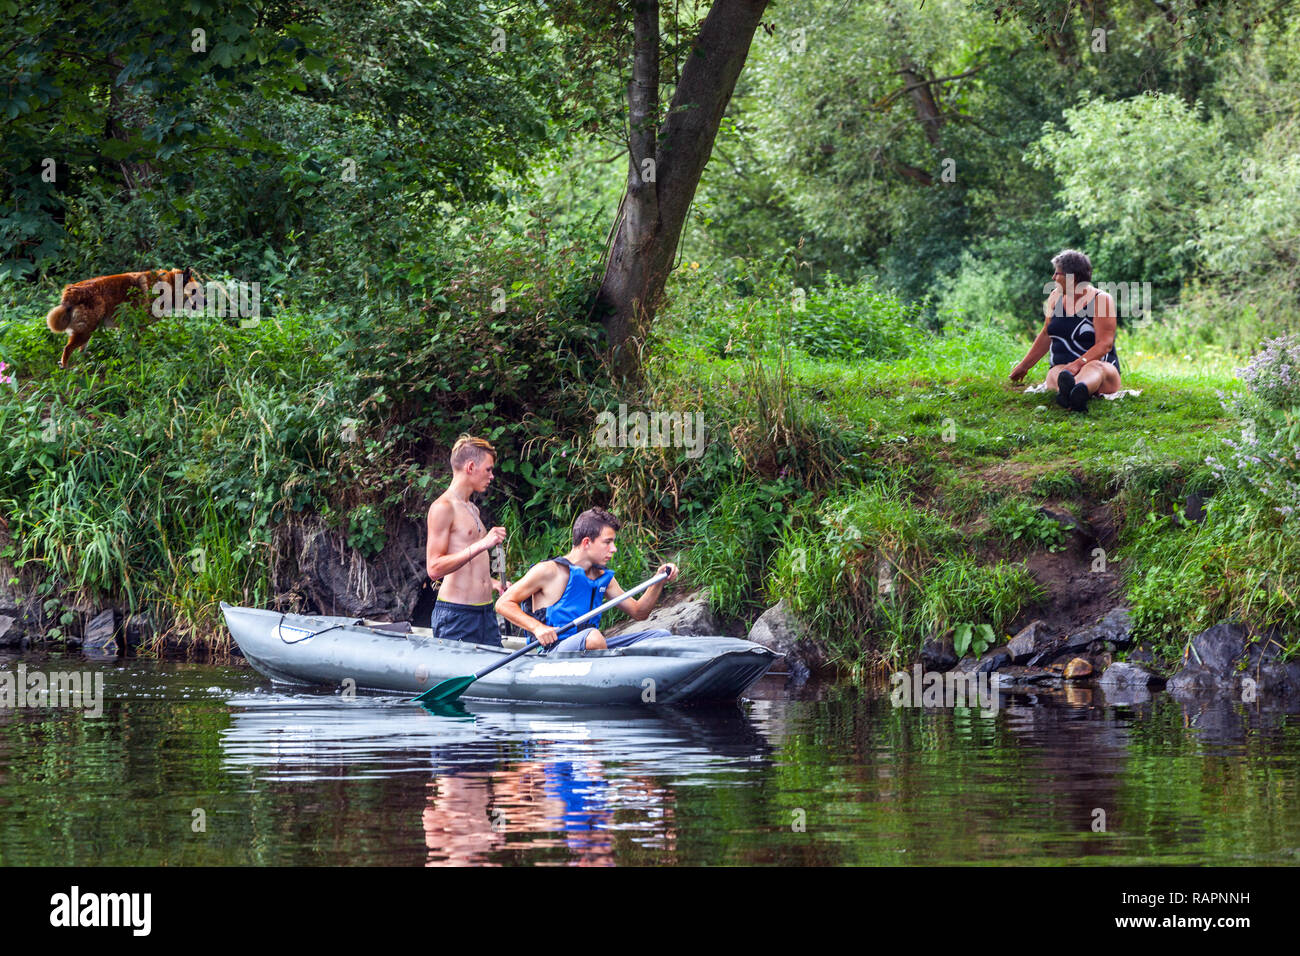 Two teenagers canoeing river, summer idyll, Czech Republic Stock Photo